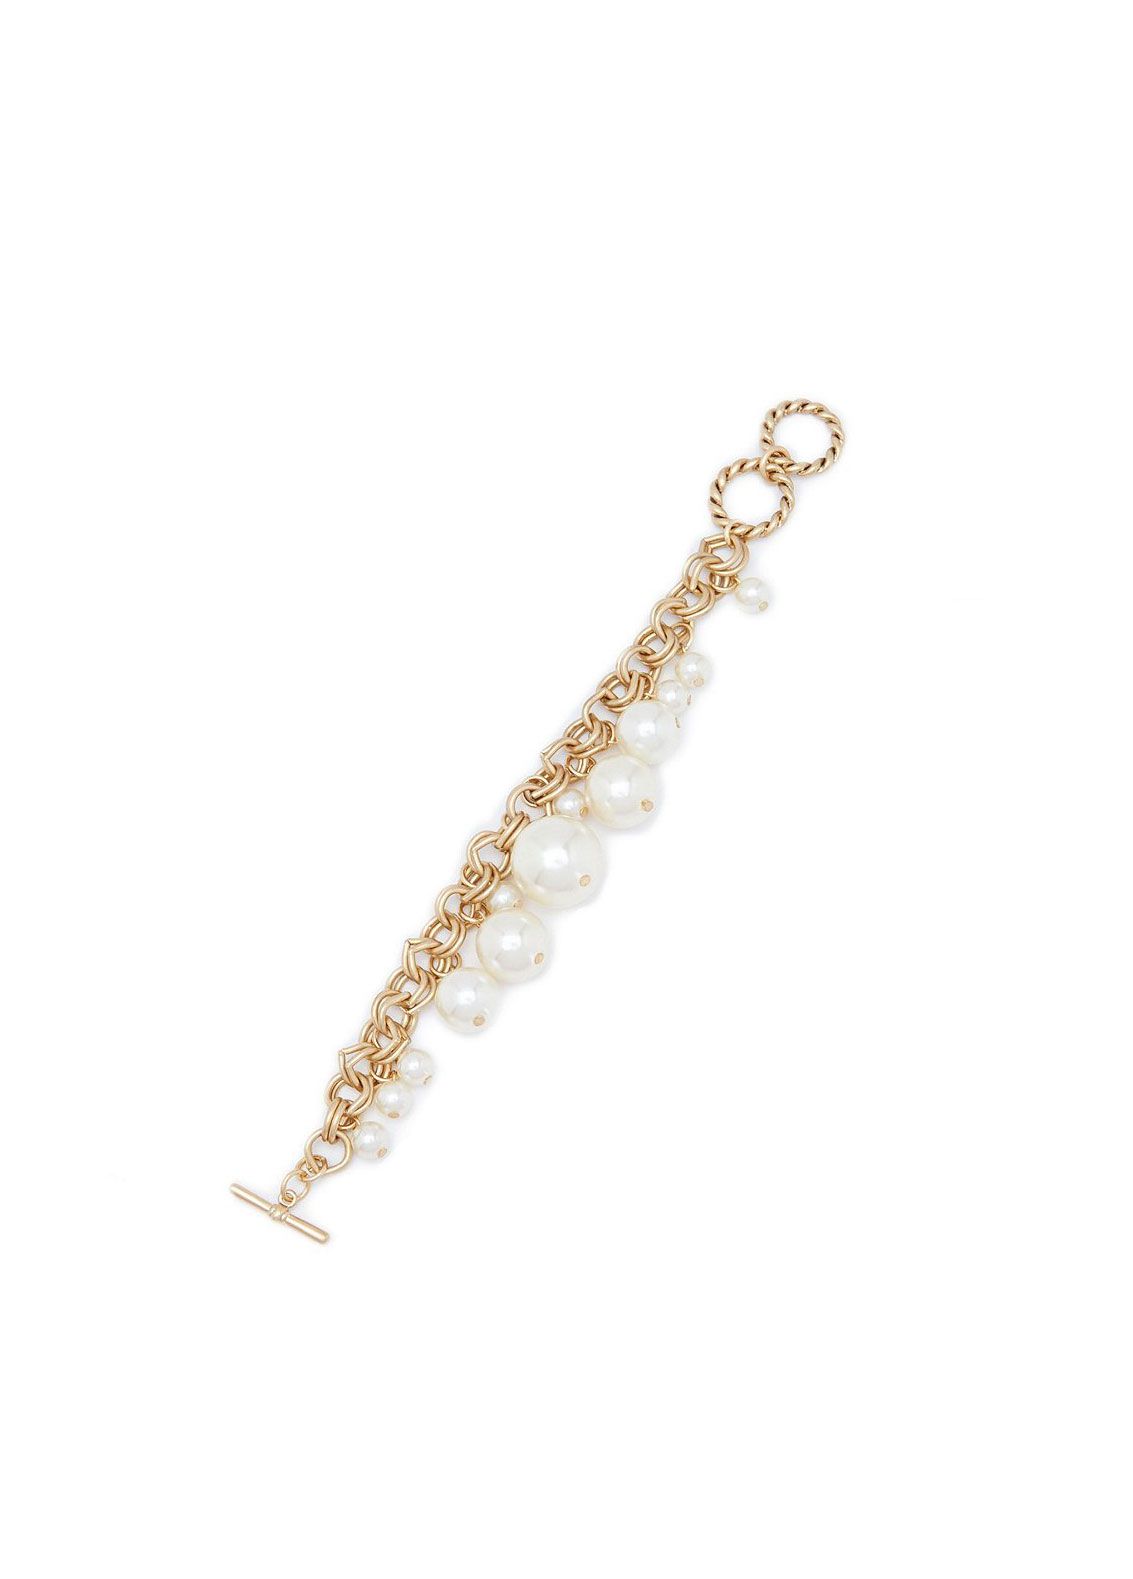 Southern Living McGraw Faux-Pearl & Chain Line Bracelet